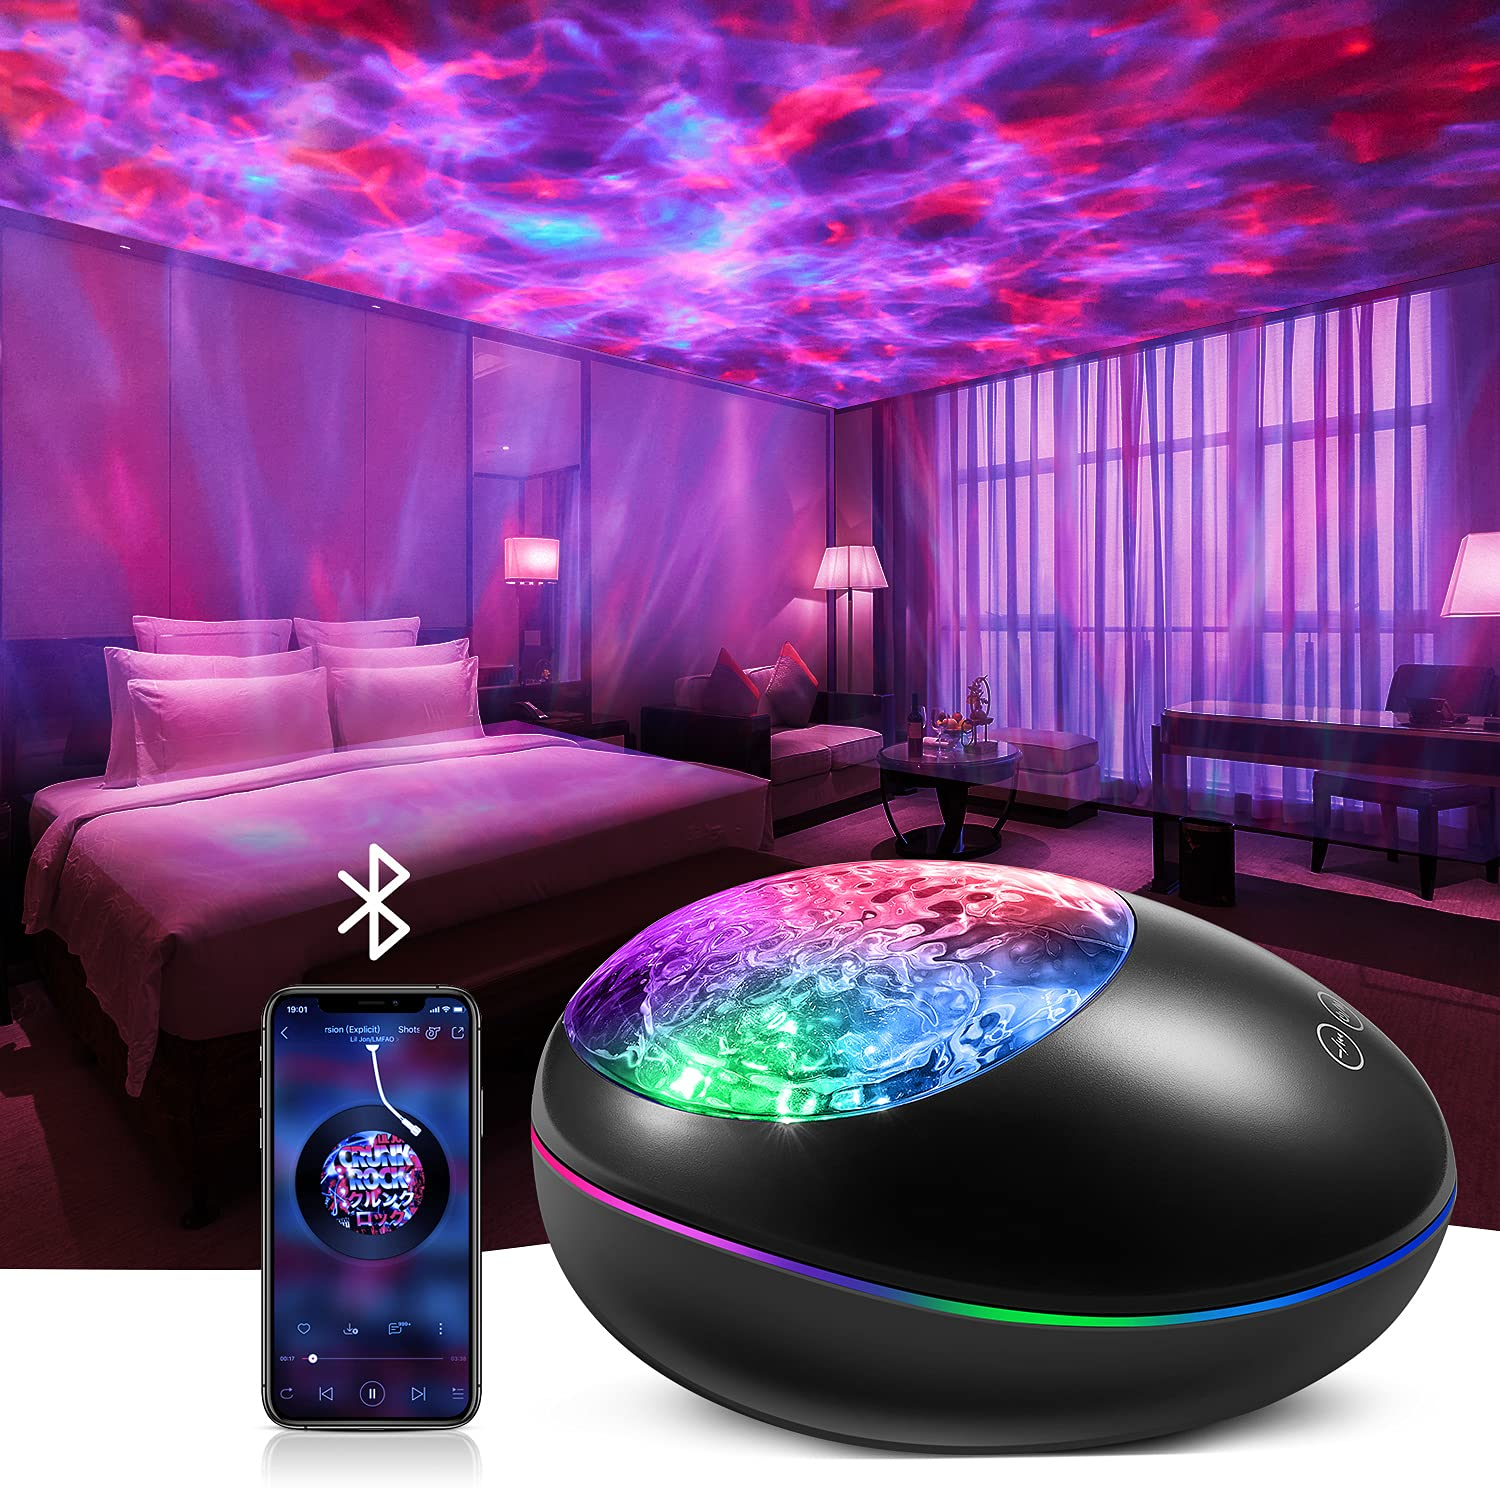 LED Moon Projector Starry Nebula Projector 13 Colors Mode Night Light Projector Bluetooth/USB Music Speaker with Timer and Voice Control for for Gifts Kids Adults Room Home Decoration 